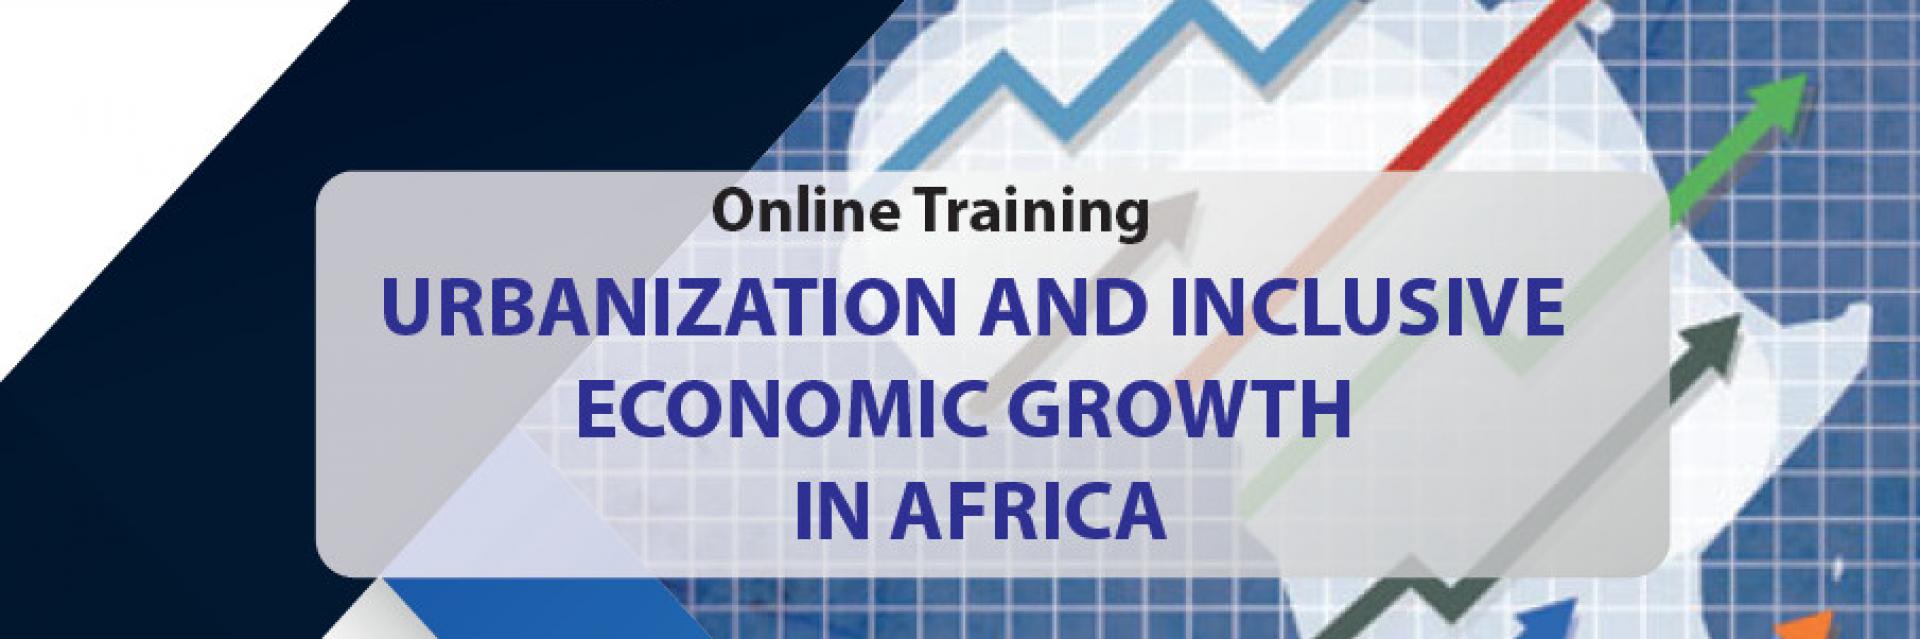 Urbanization and Inclusive Economic Growth in Africa